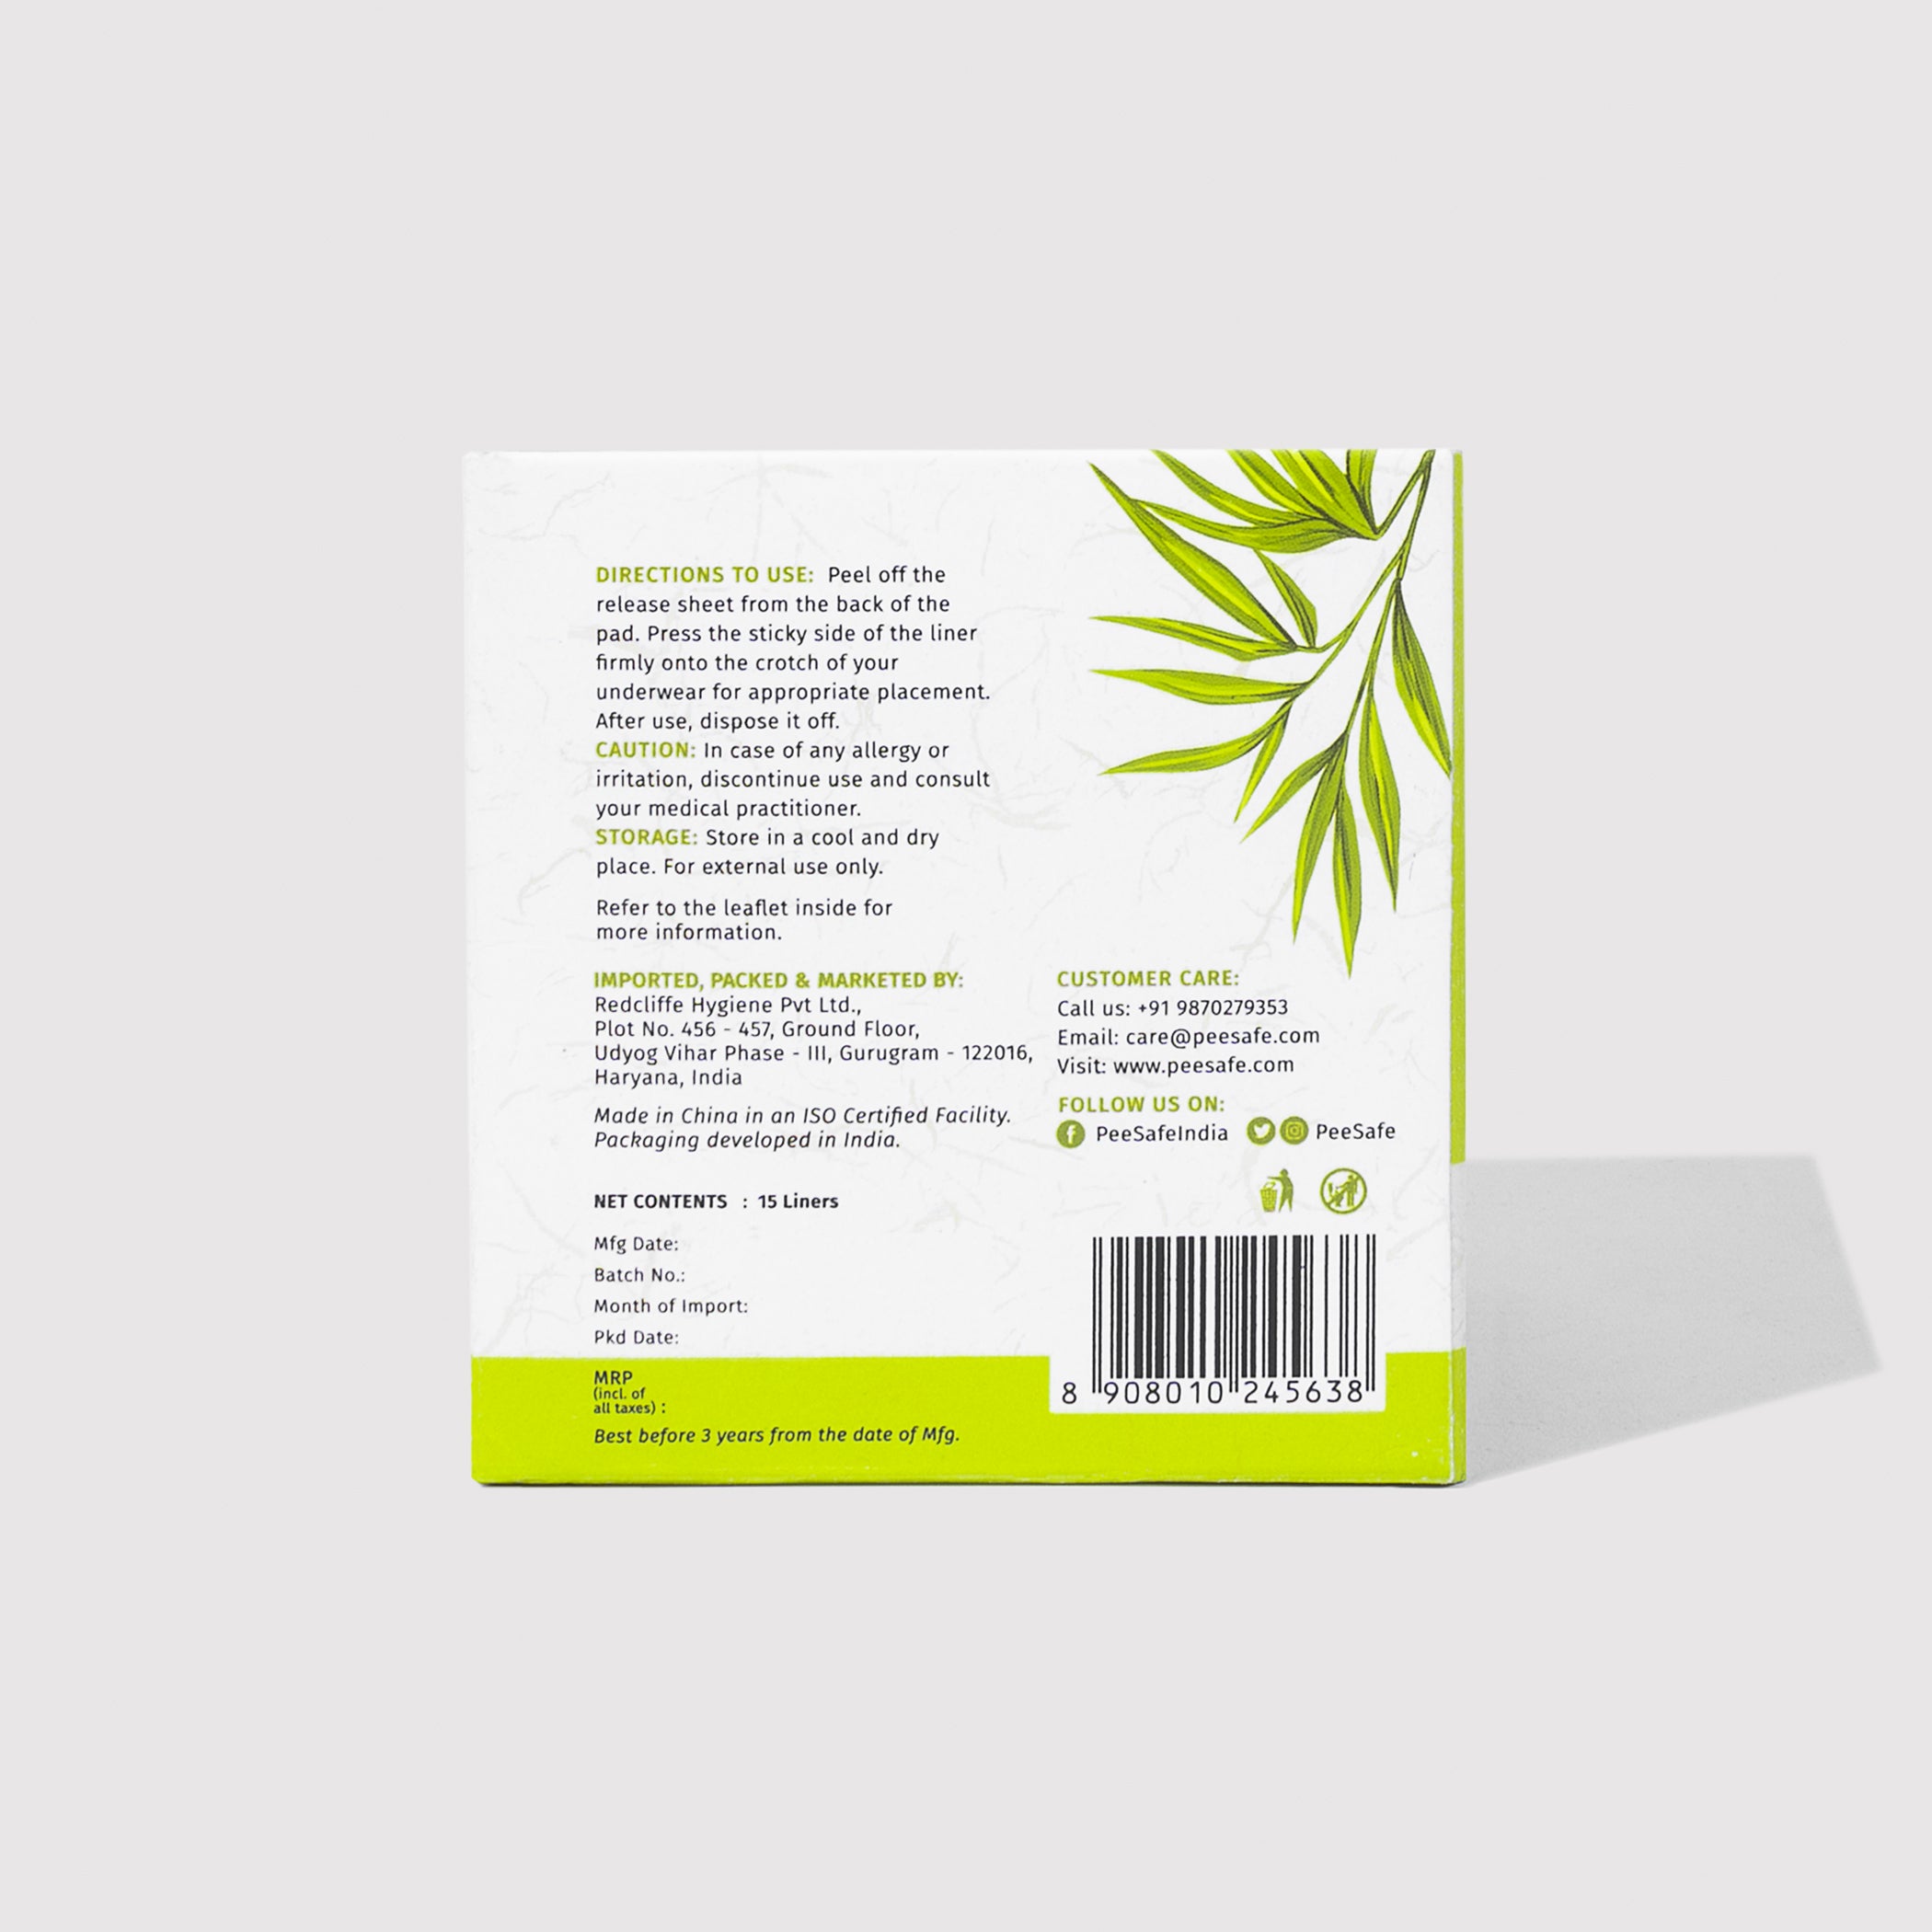 Pee Safe Biodegradable Panty Liners (15 Liners)